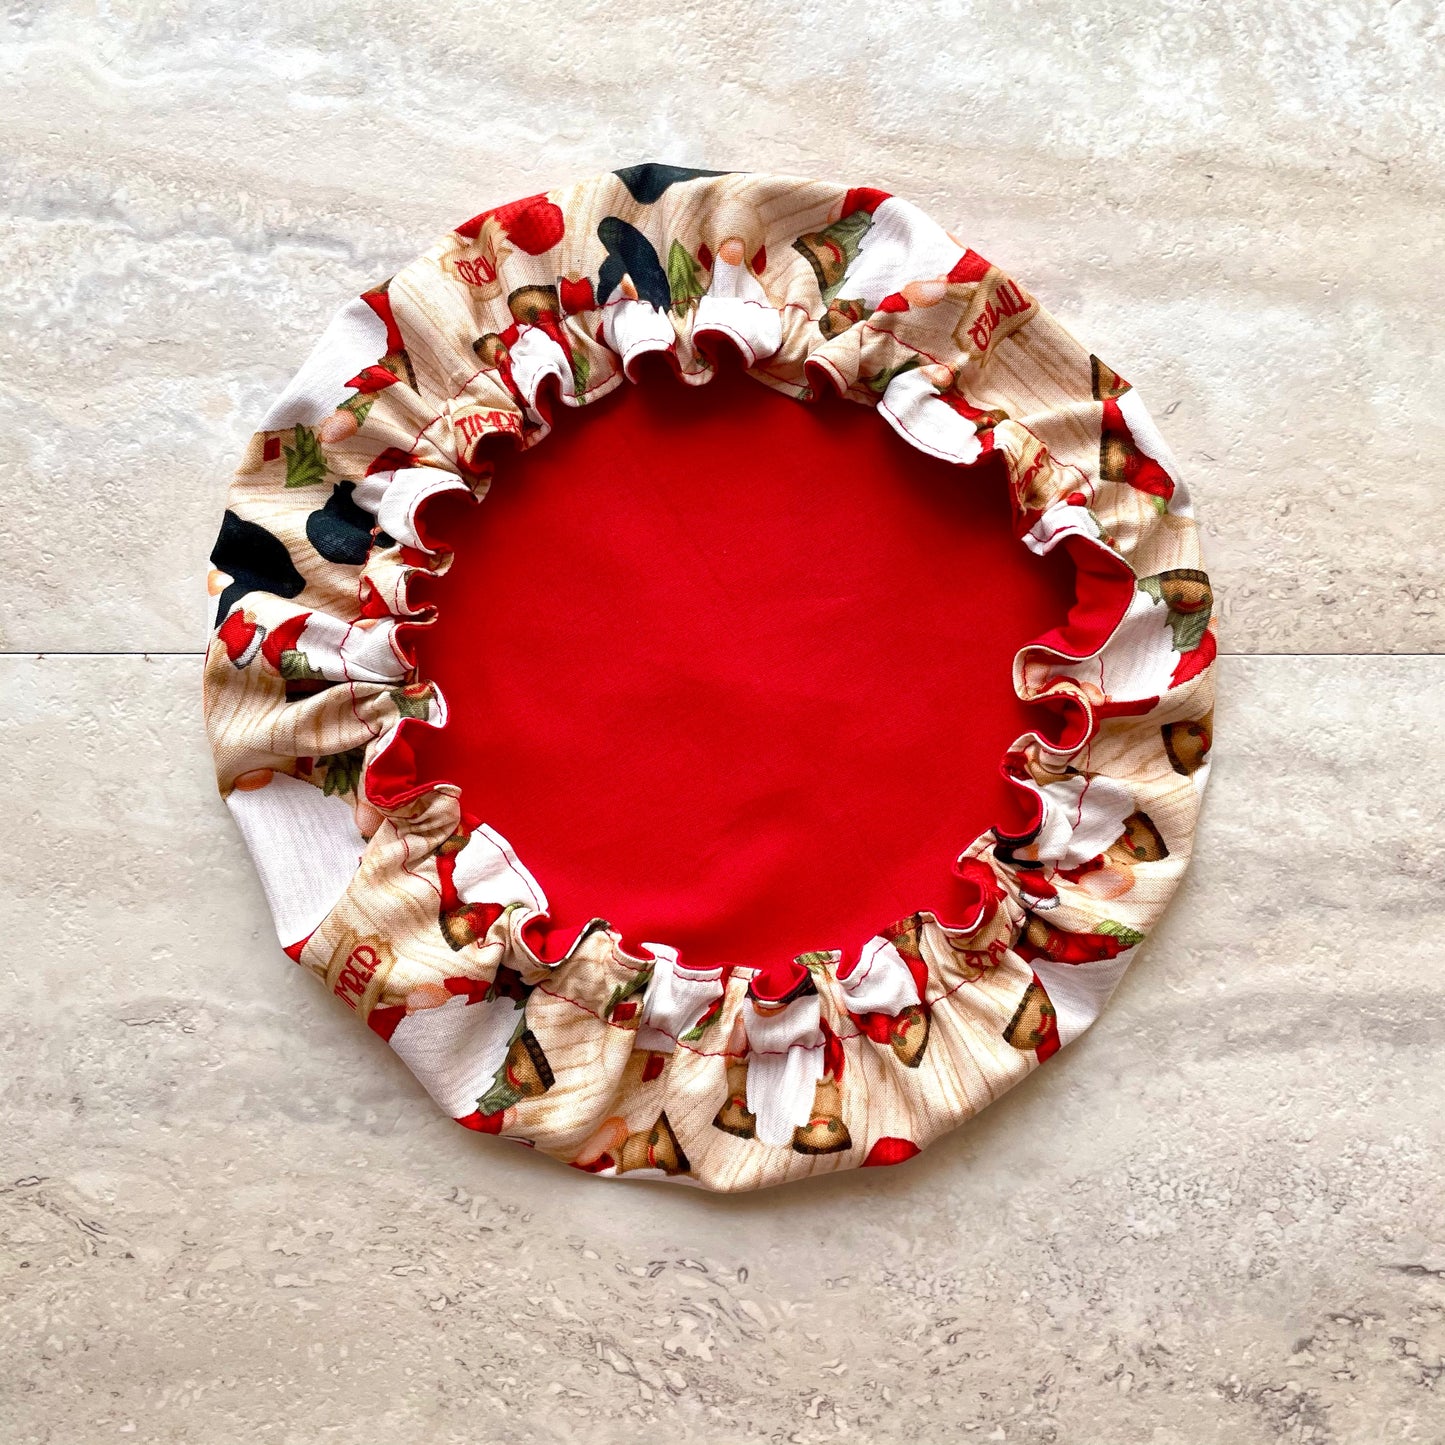 Stand Mixer Bowl Covers - Christmas Timber Gnomes